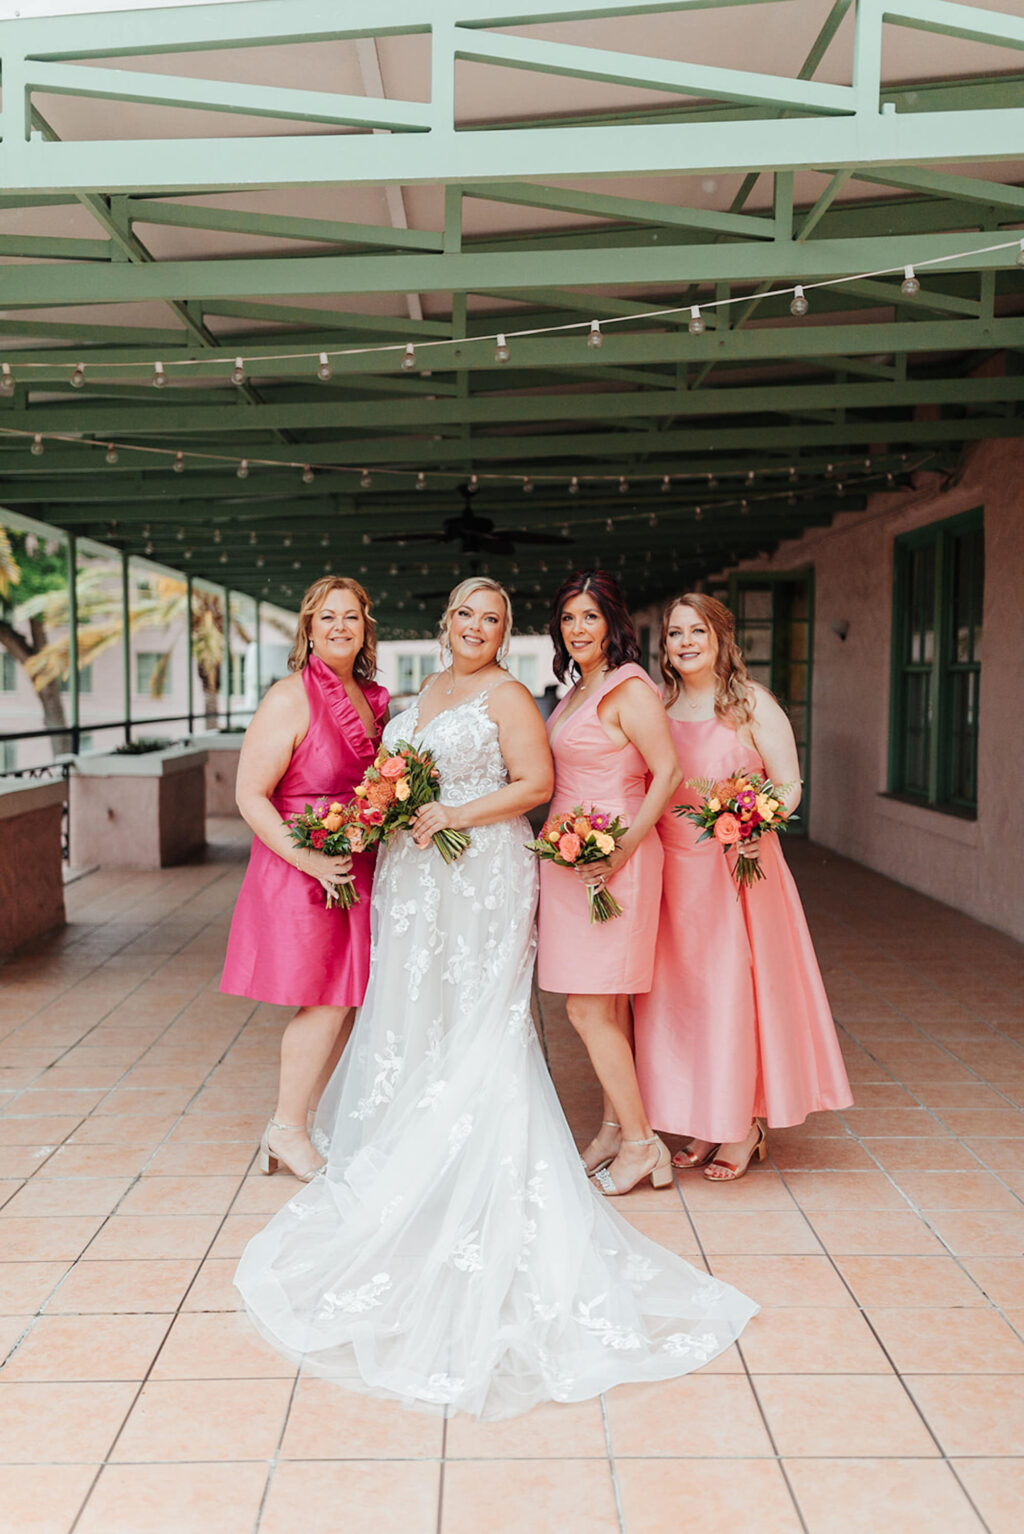 Bride with Bridesmaids in Mix and Match Long and Short Bright Pink Tropical Florida Bridesmaids Wedding Dresses | St Petersburg Hair and Makeup Femme Akoi